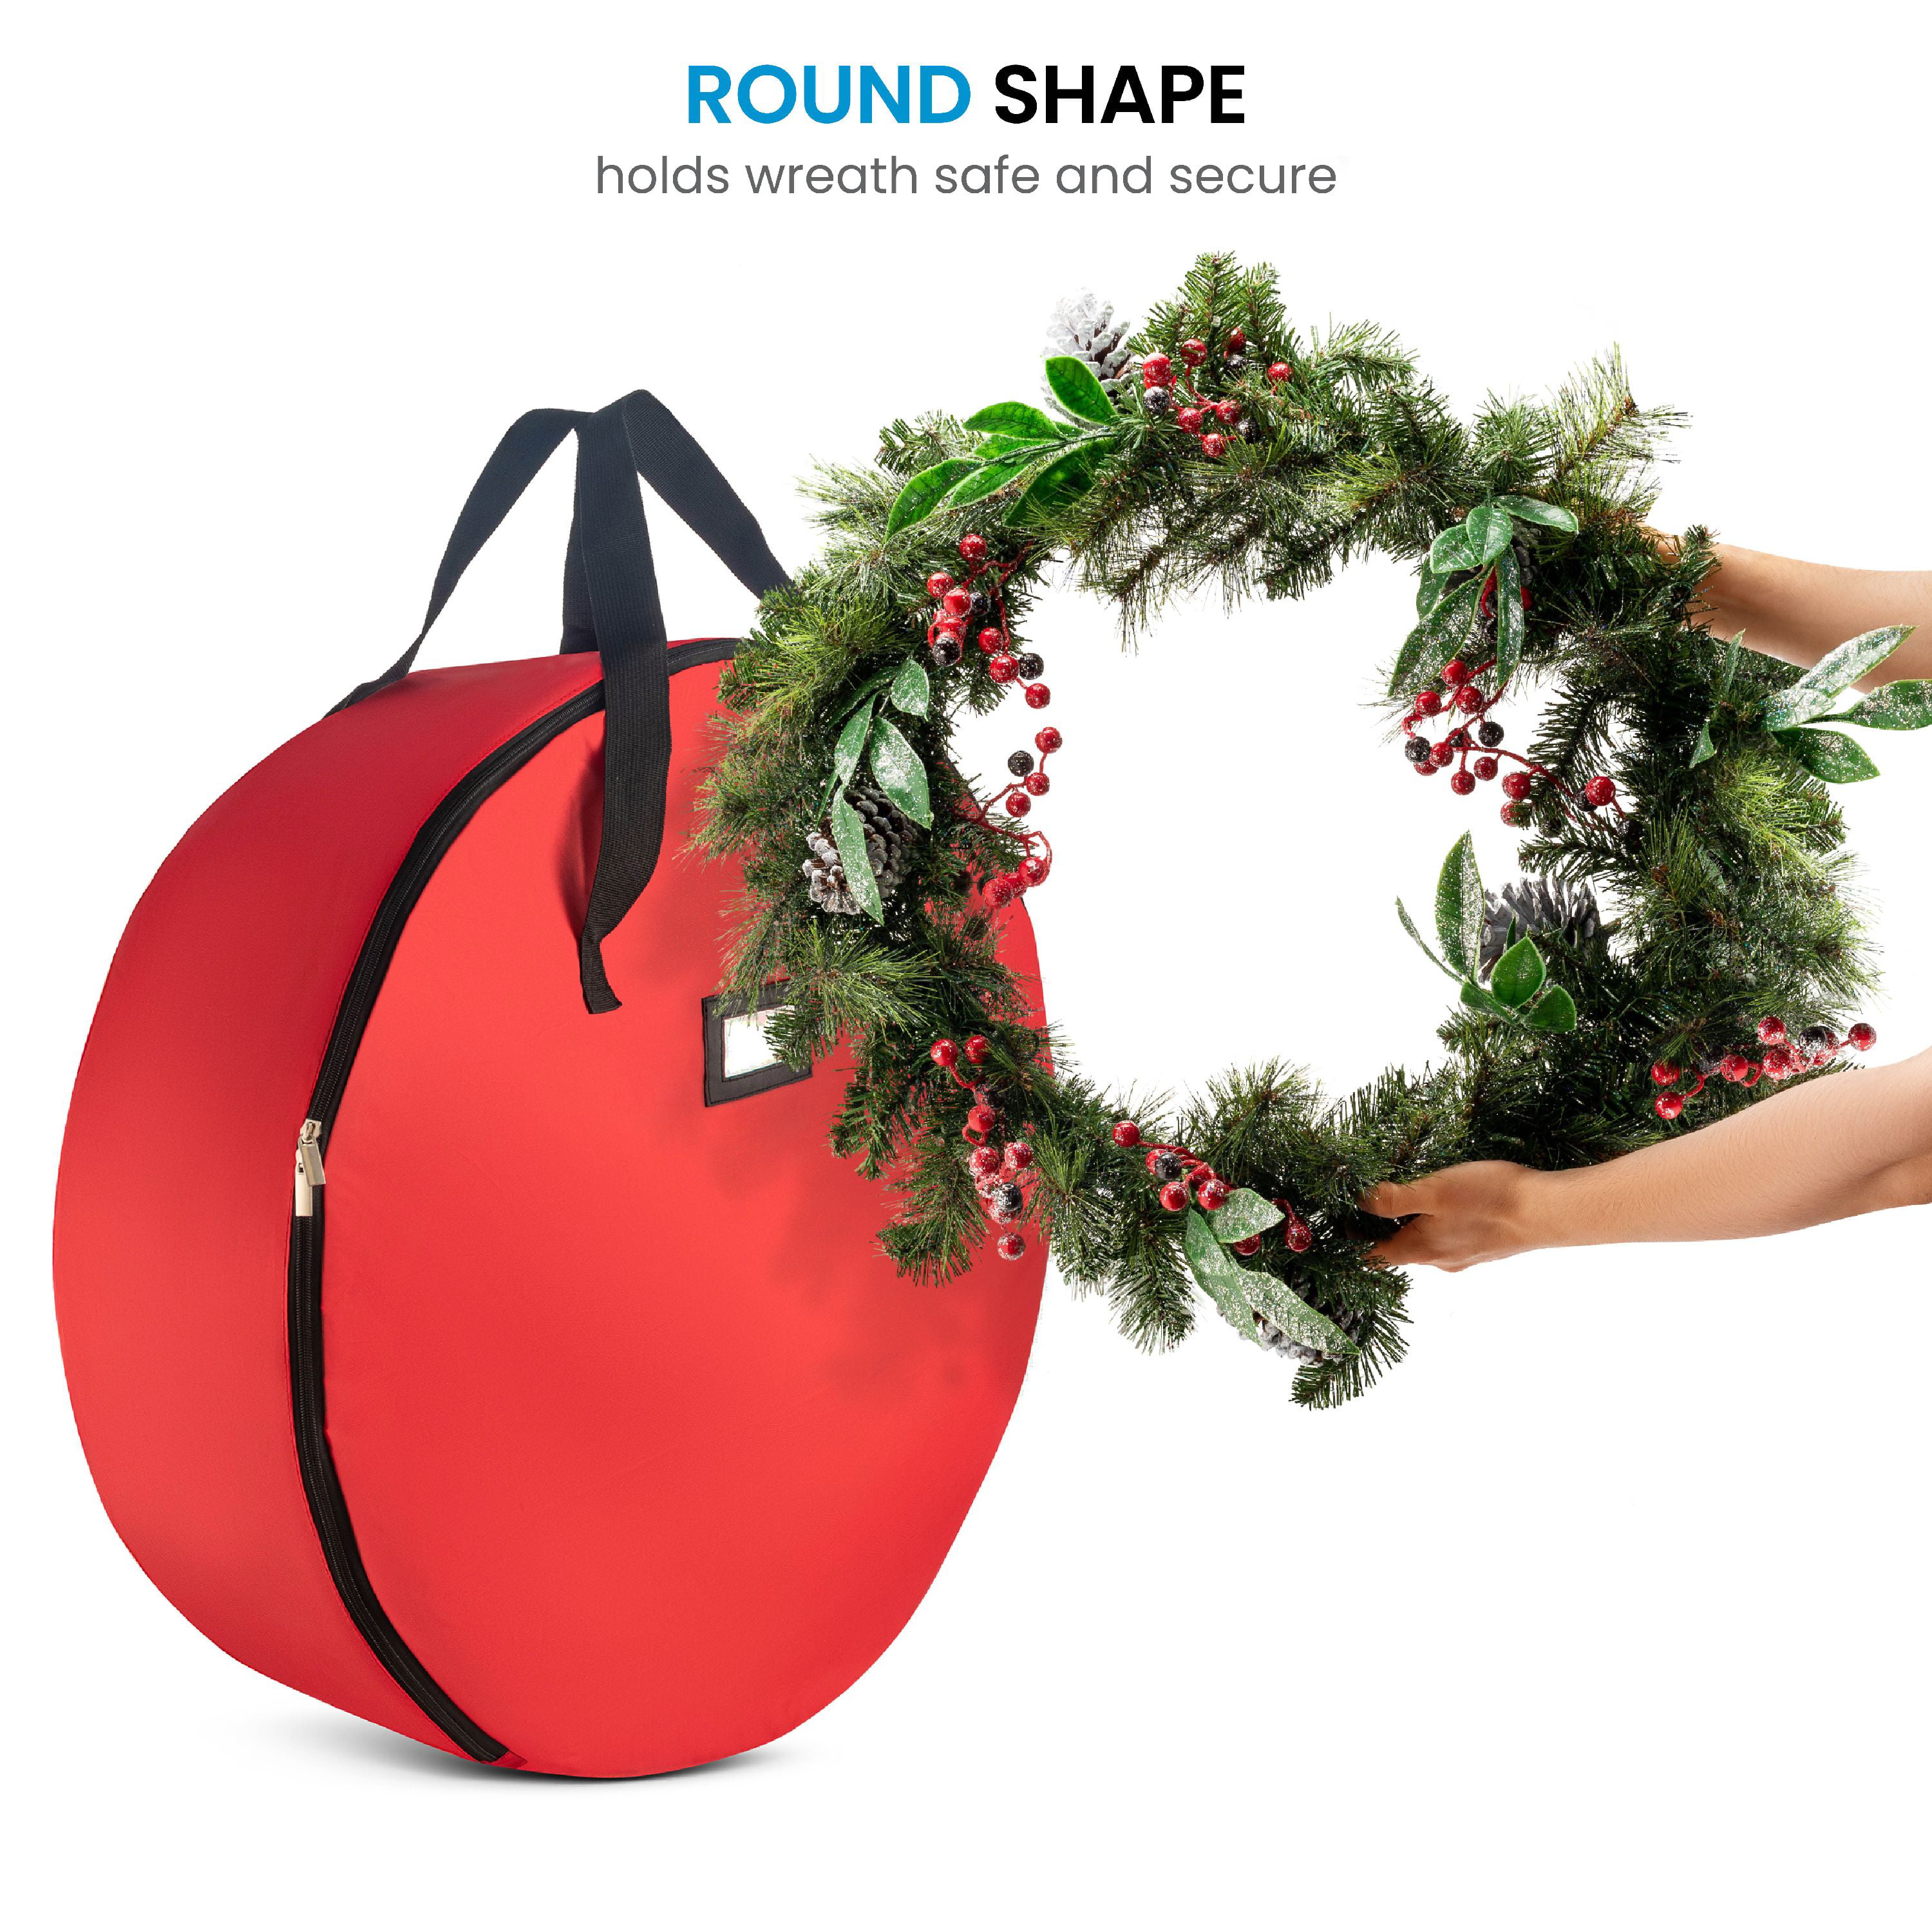 Premium 600D Oxford Tear Resistant Fabric Storage Bag for Christmas wreath with Sleek Zipper Featuring Transparent Card Slot for Labeling 30 x 30 x 8 Red ZCD-101-rd Zober Christmas Holiday Wreath Storage Bag 